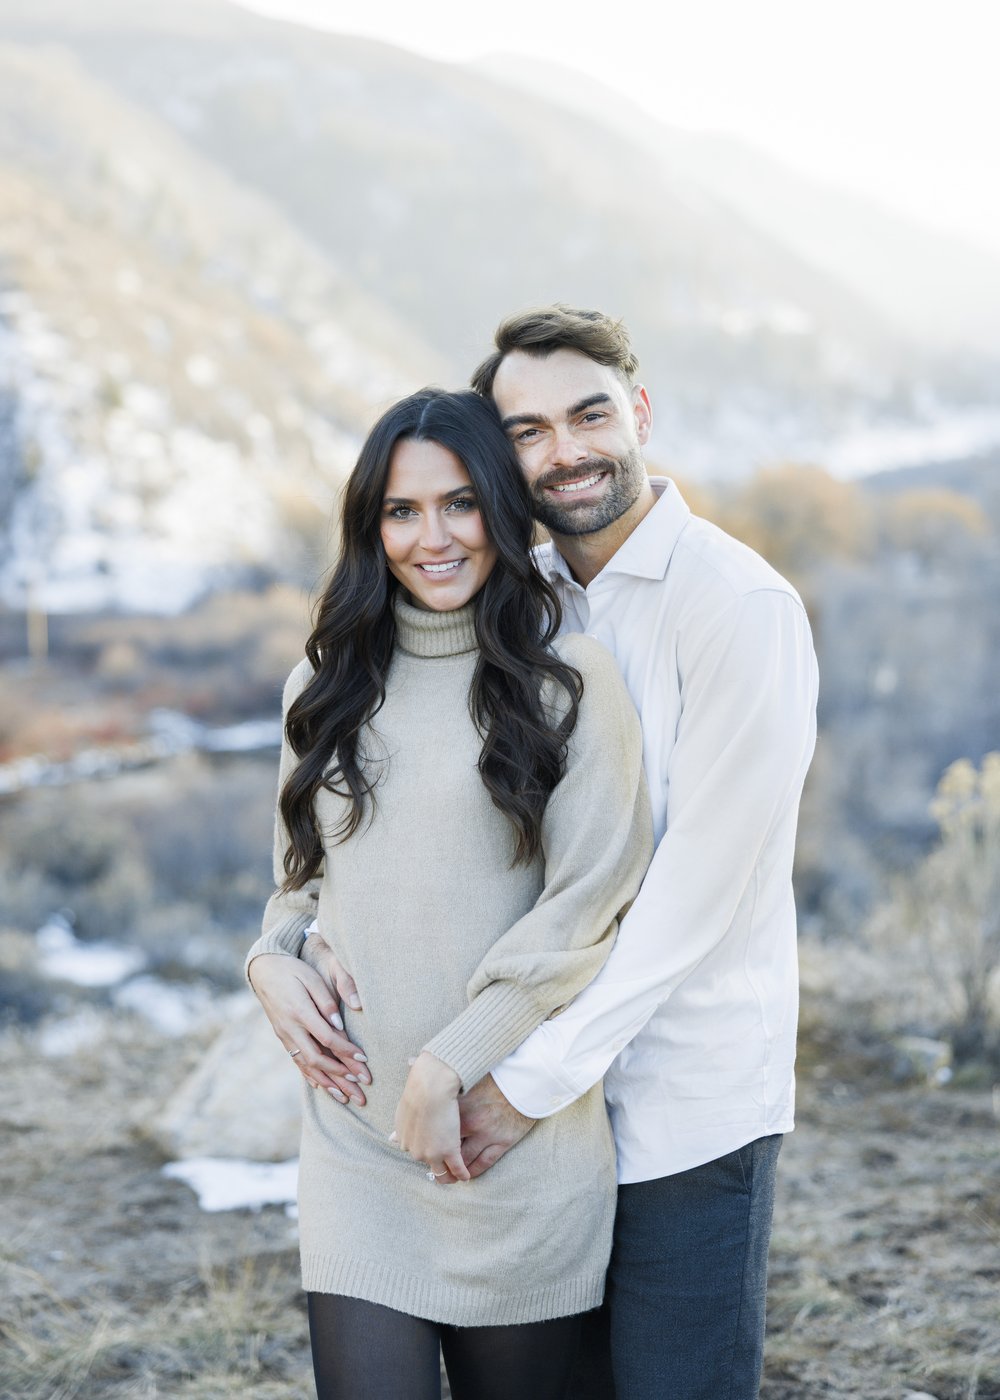  Outdoor winter engagements in warm clothing captured by high-end photographer Savanna Richardson Photography. high-end photographer #SavannaRichardsonPhotography #Proposal #proposalphotography #ProProposalCompany #engaged #engagementphotography 